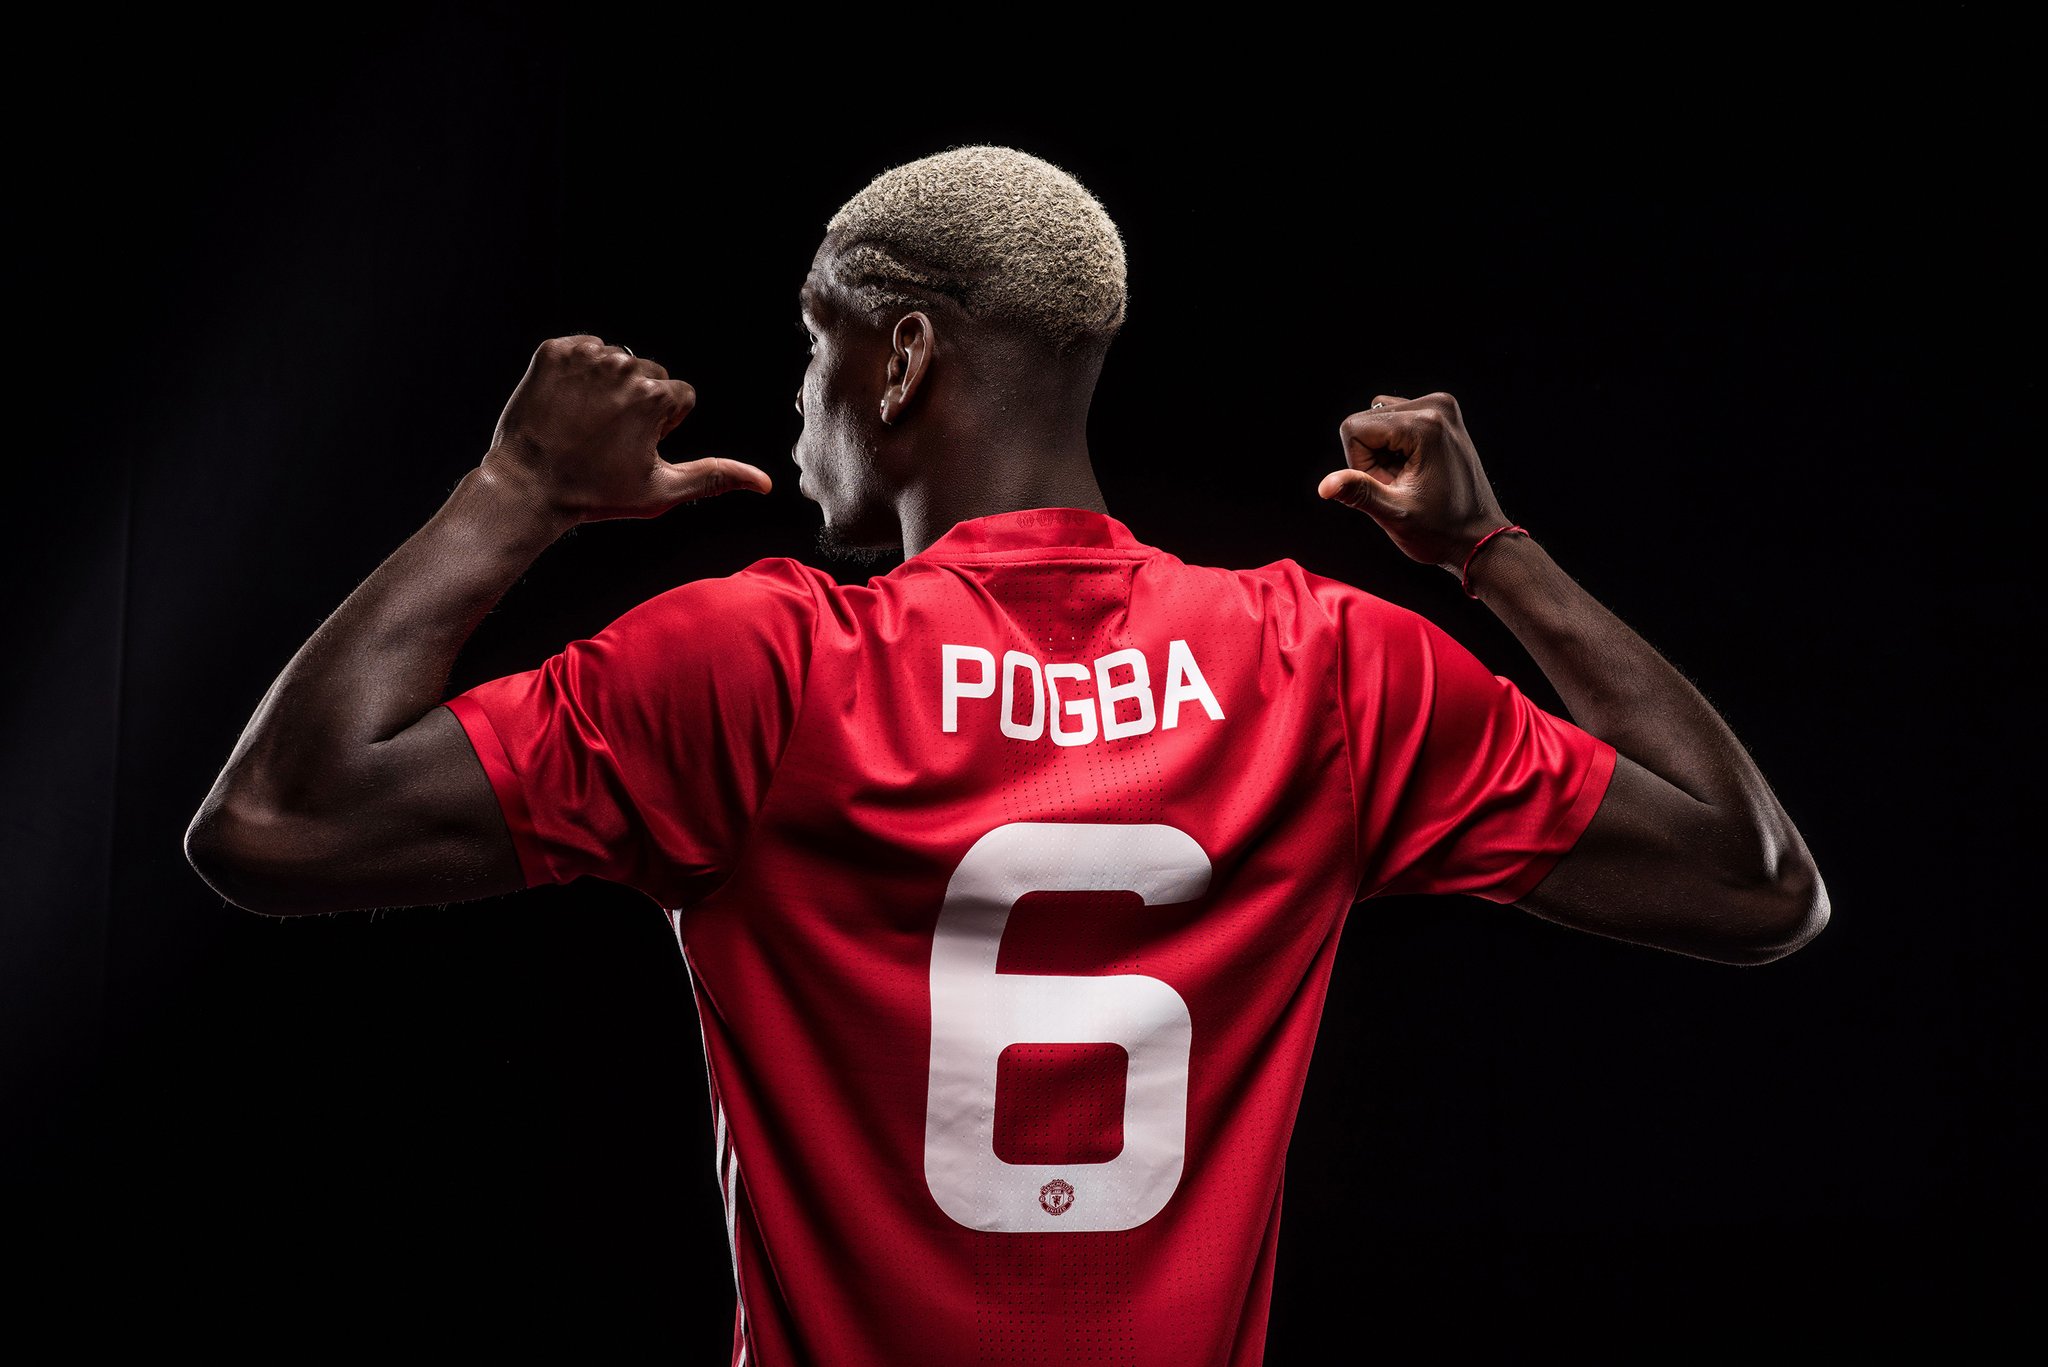 REVEALED: Pogba's squad number at 